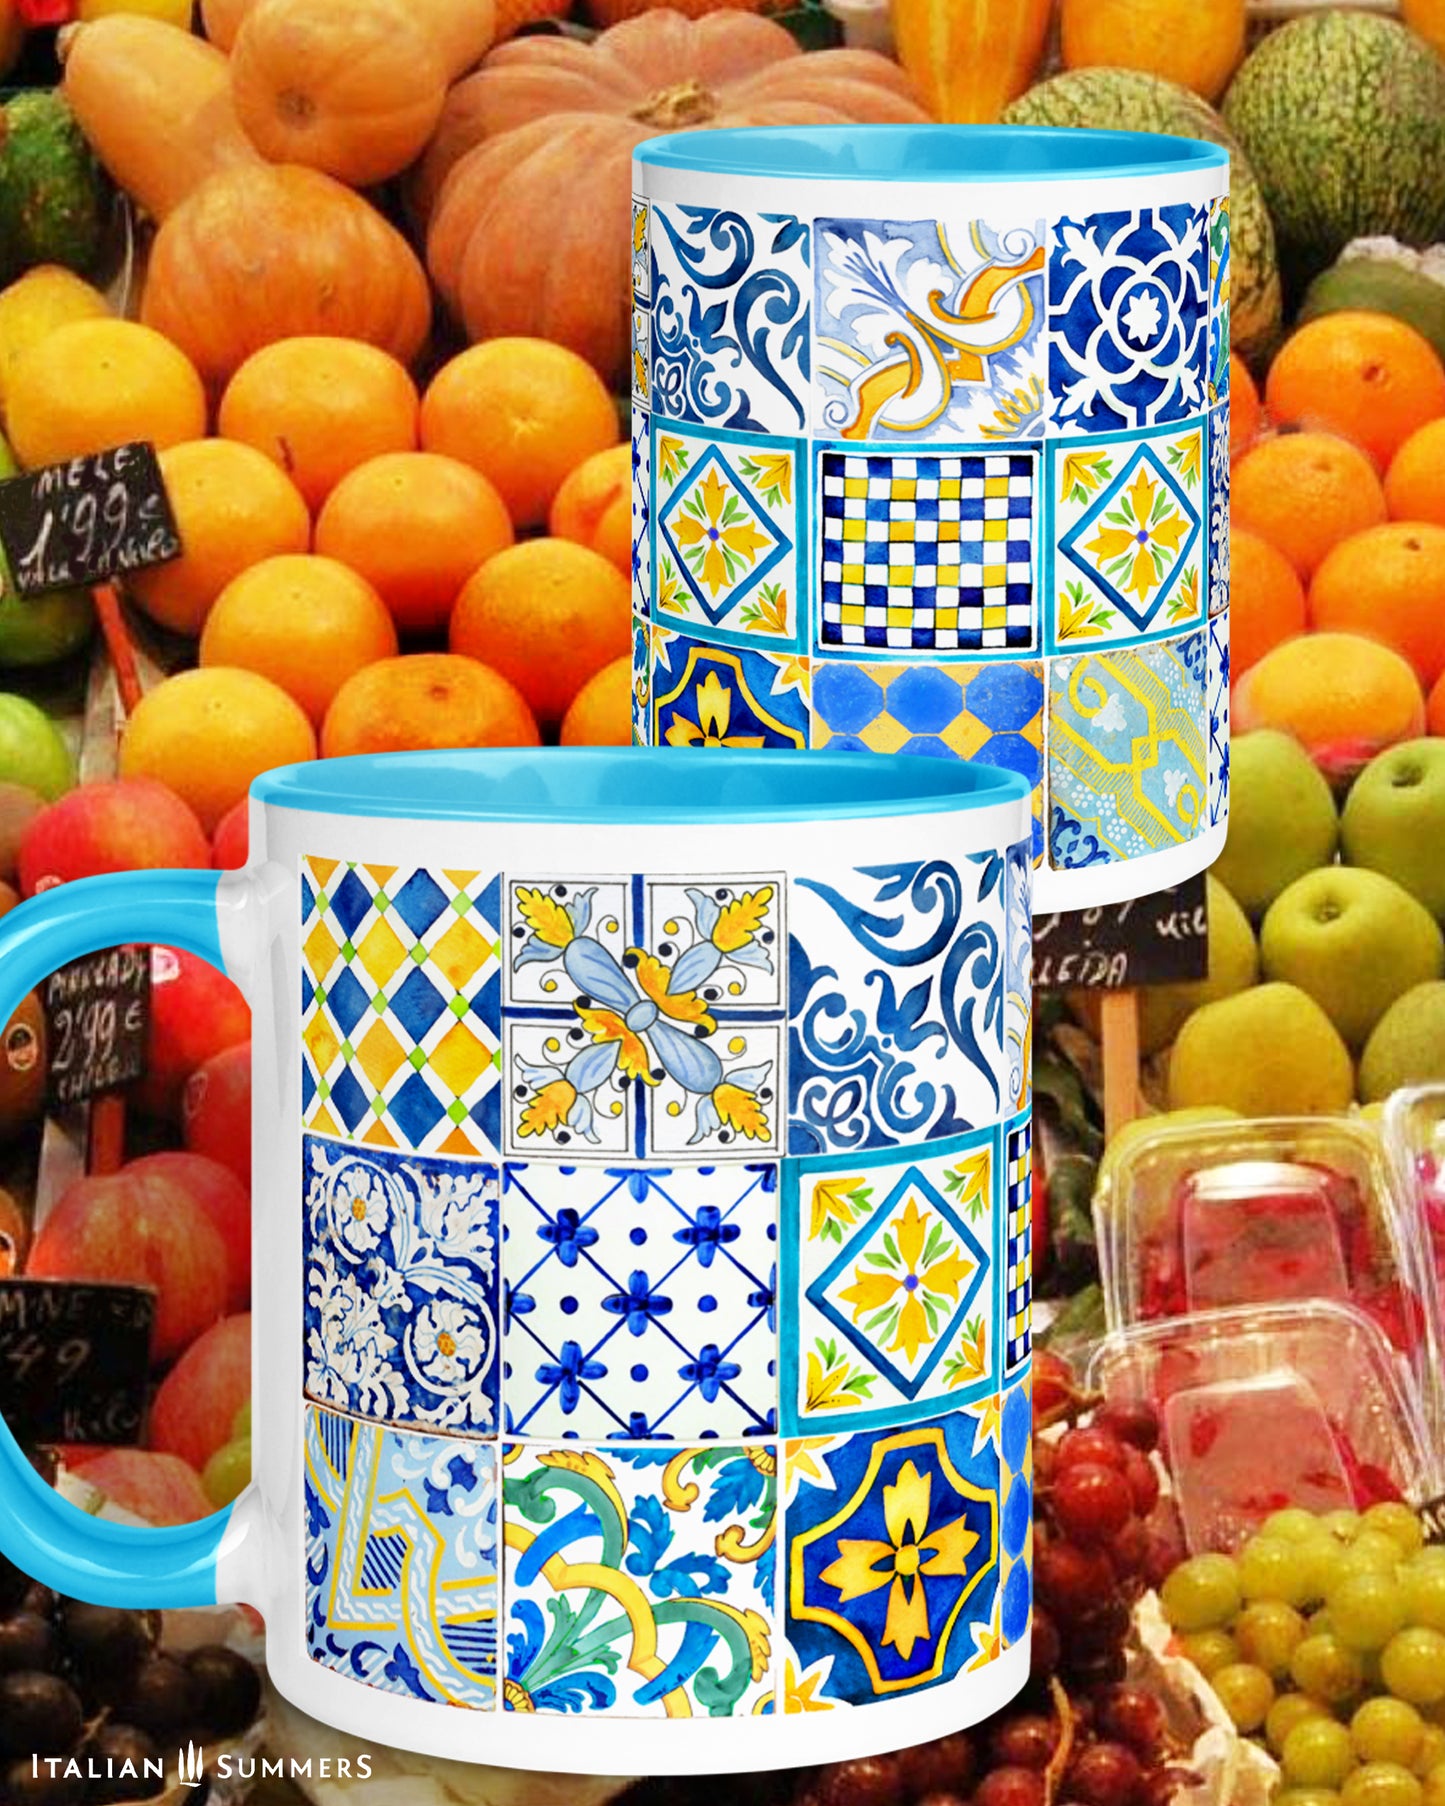 Italy inspired mug with colorful Italian Sicilian tiles on all the sides oif the mug, Italian Sicilian tiles with main colors blue and yellow, 3 rows of Sicilian Italian maiolica tiles. Inside and handle of the mug available in yellow and blue. Made by Italian Summers.